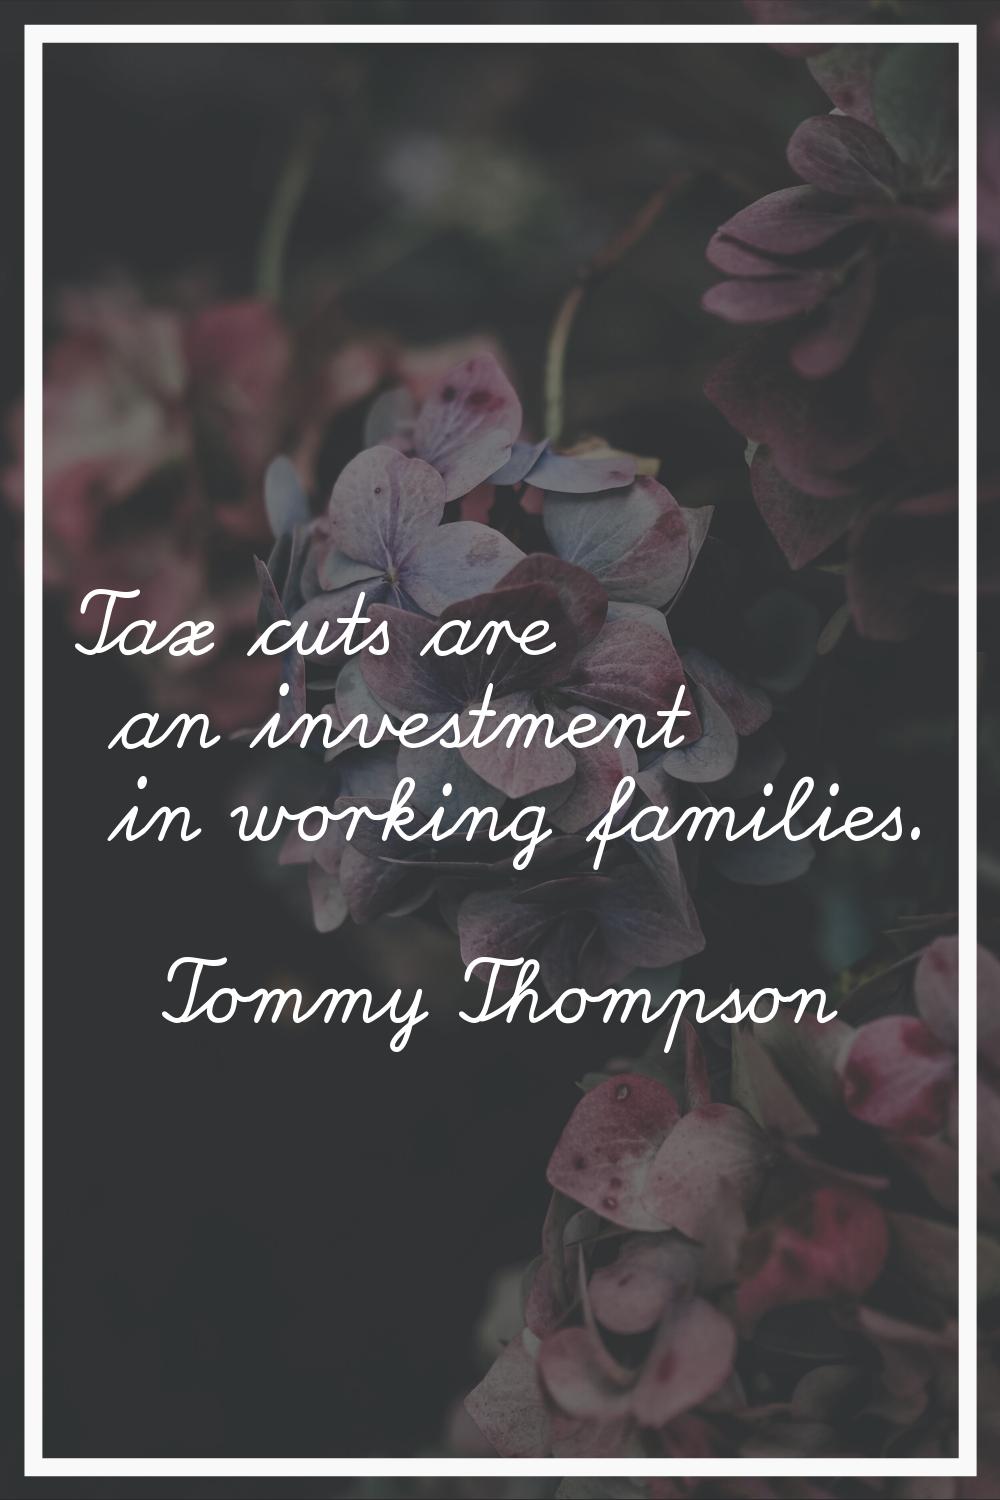 Tax cuts are an investment in working families.